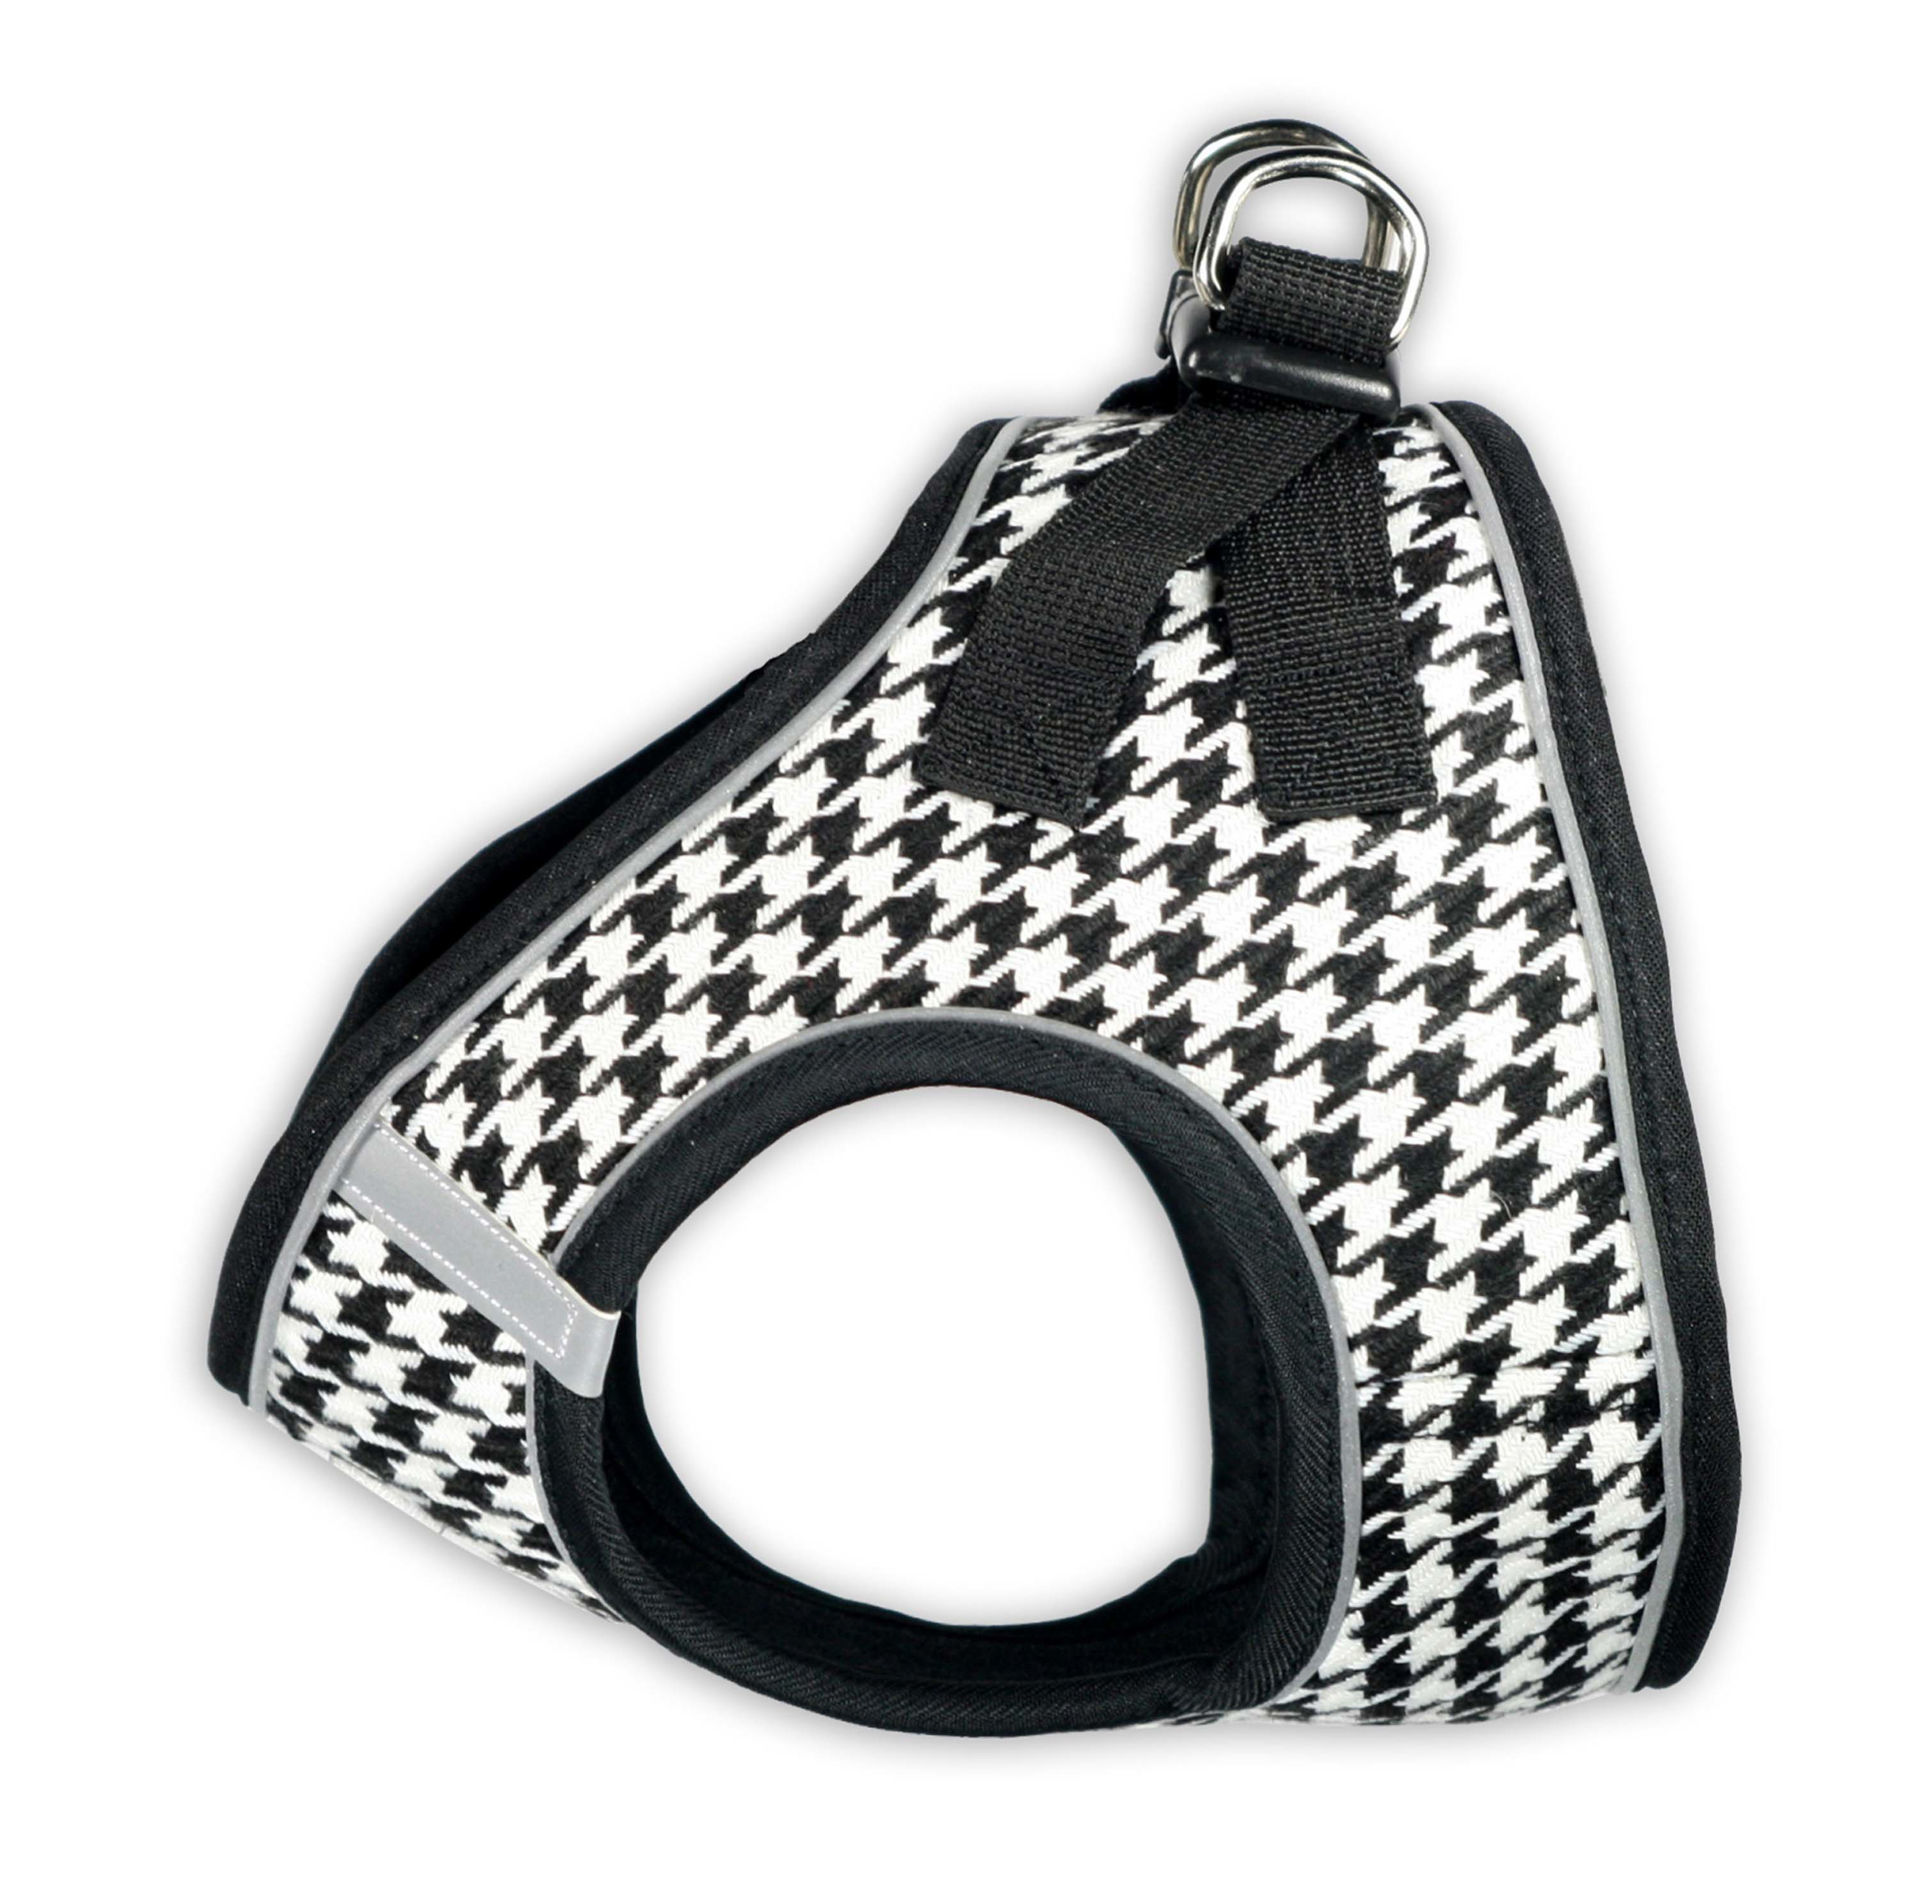 Picture of EZ Step-In Harness Vest - Houndstooth - Black/White